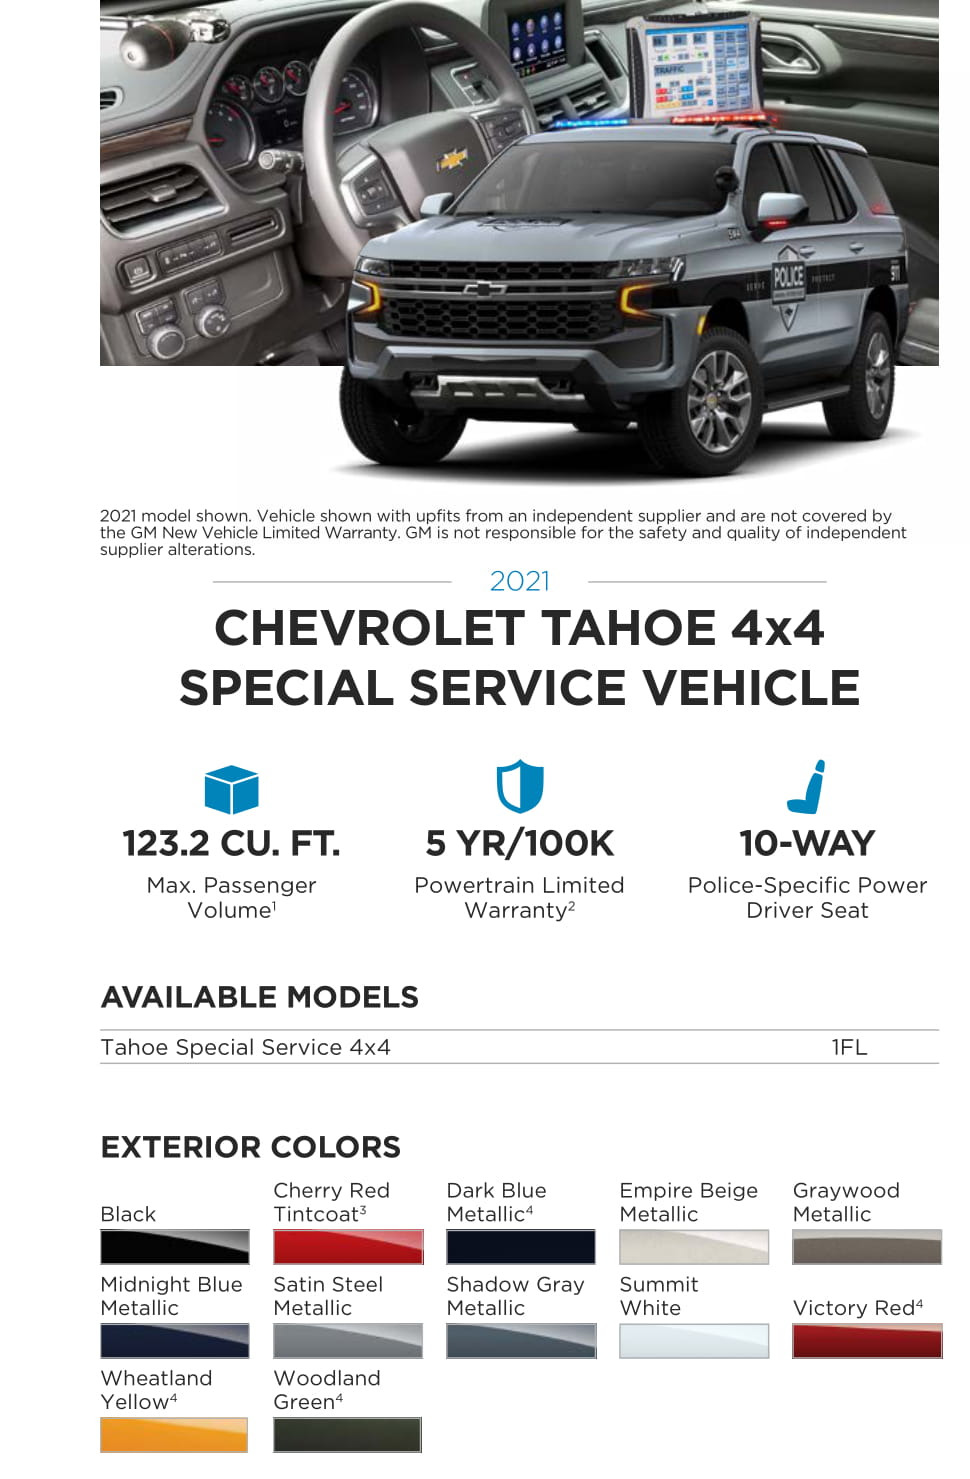 Exterior Paint Colors Used on the SSV GM Special Model Vehicles in 2021